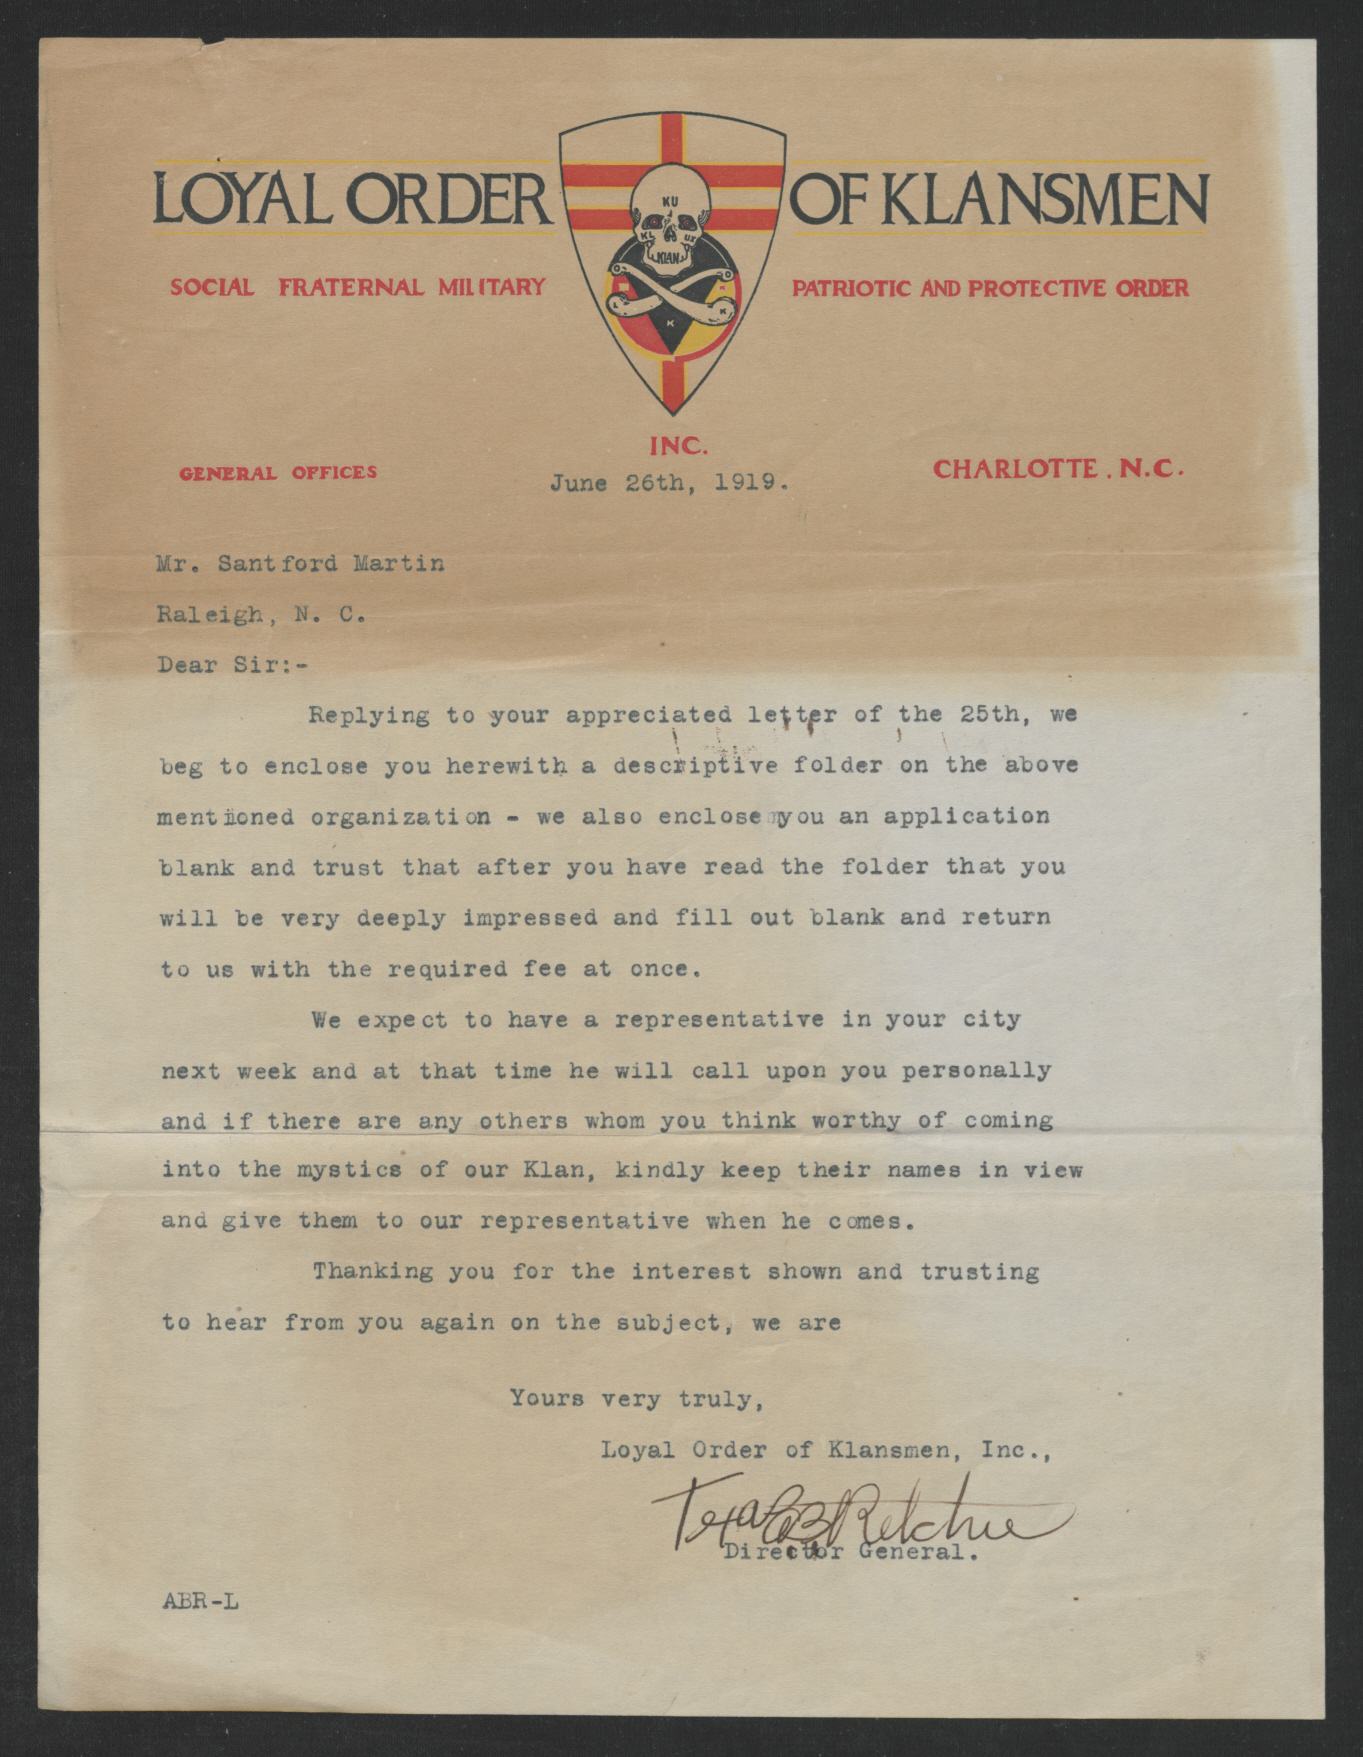 Letter from Texas B. Ritchie to Santford Martin, June 26, 1919